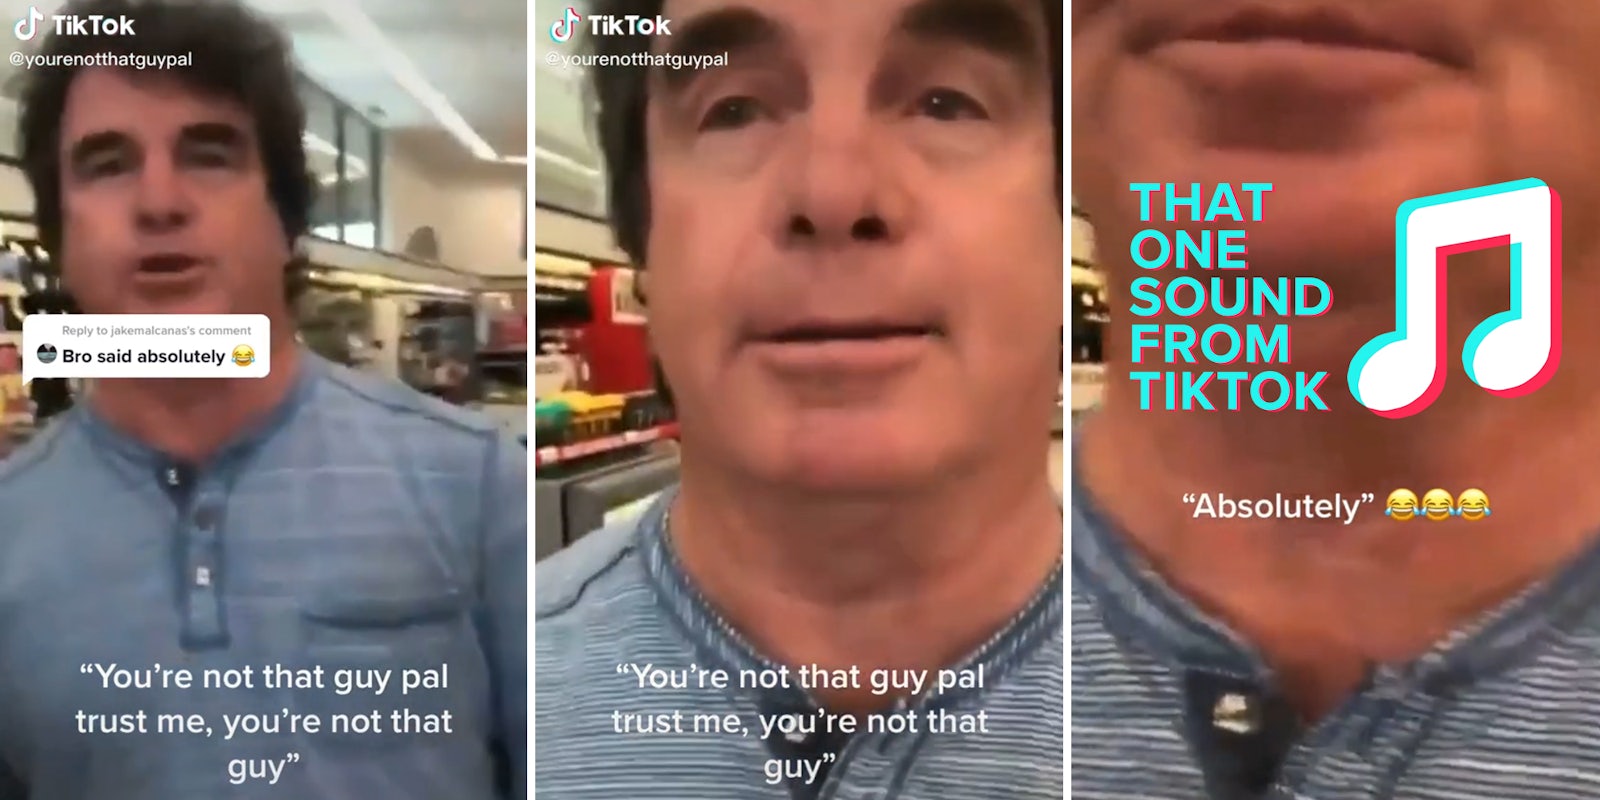 man approaching in grocery store with caption 'Bro said absolutely' (l) man with 'You're not that guy, pal, trust me, you're not that guy' caption (c) close up of man's mouth and neck with caption 'Absolutely' and 'That one sound from tiktok' logo